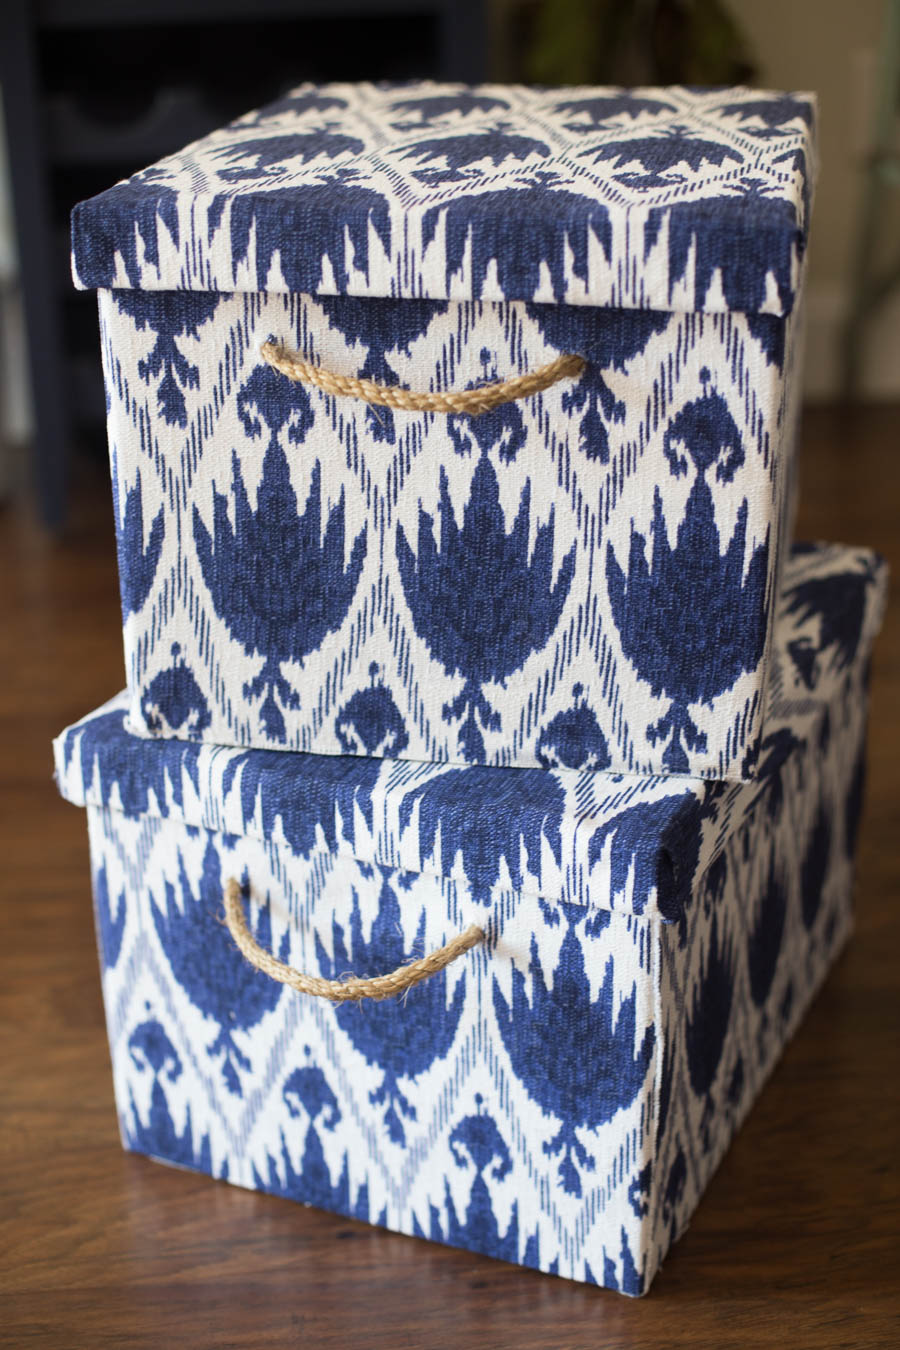 Fabric covered boxes